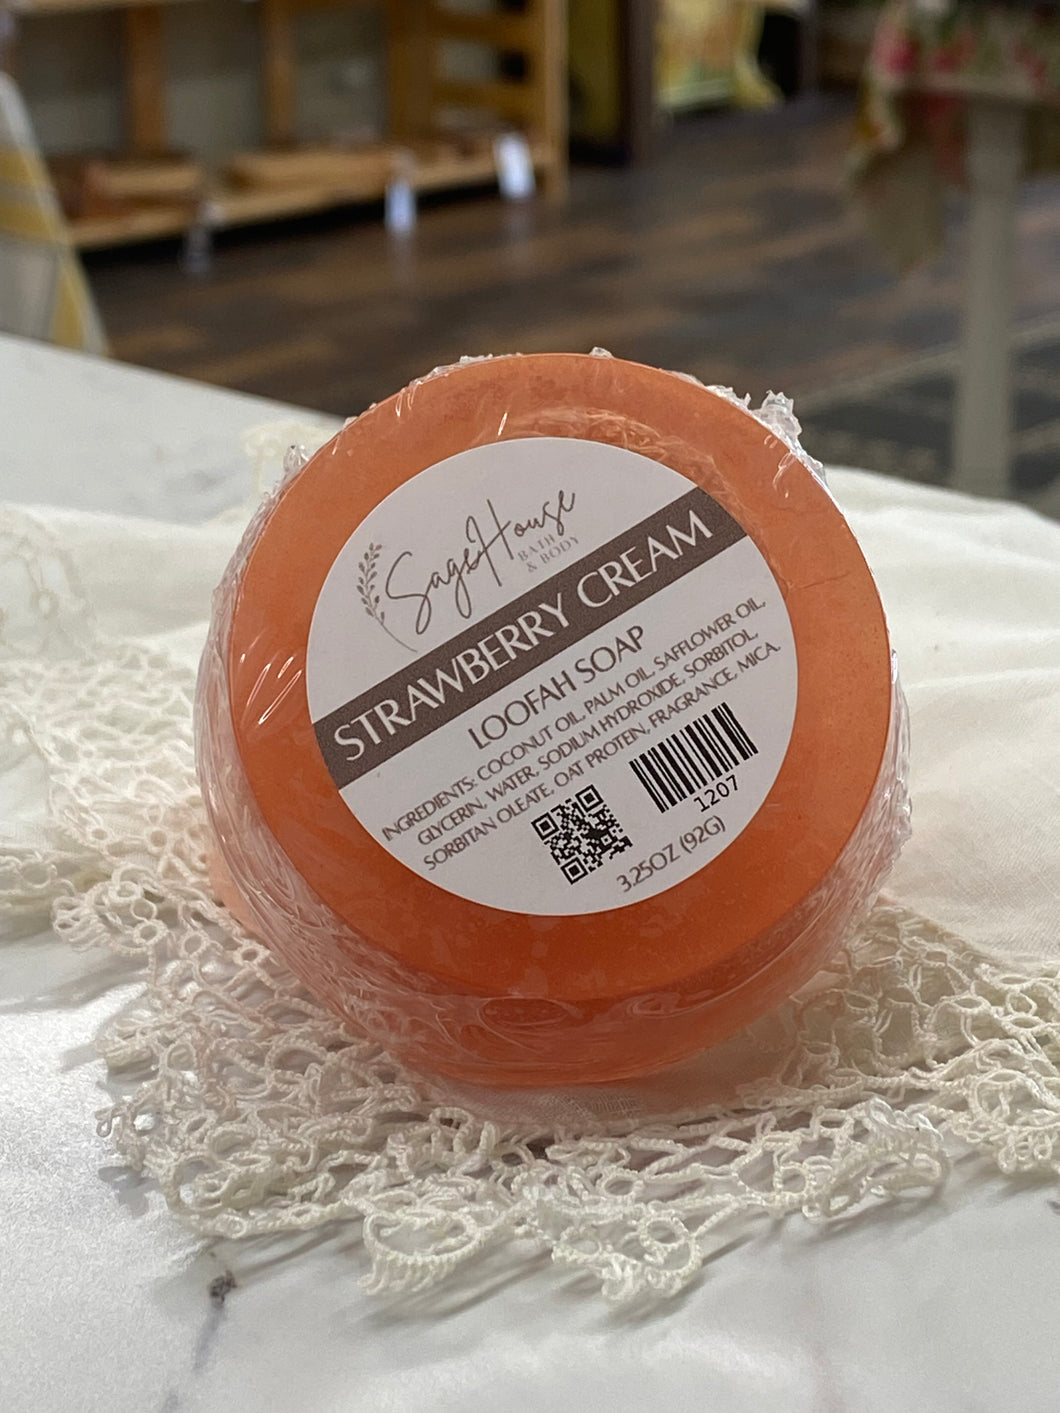 Strawberries and Cream Loofah Soap